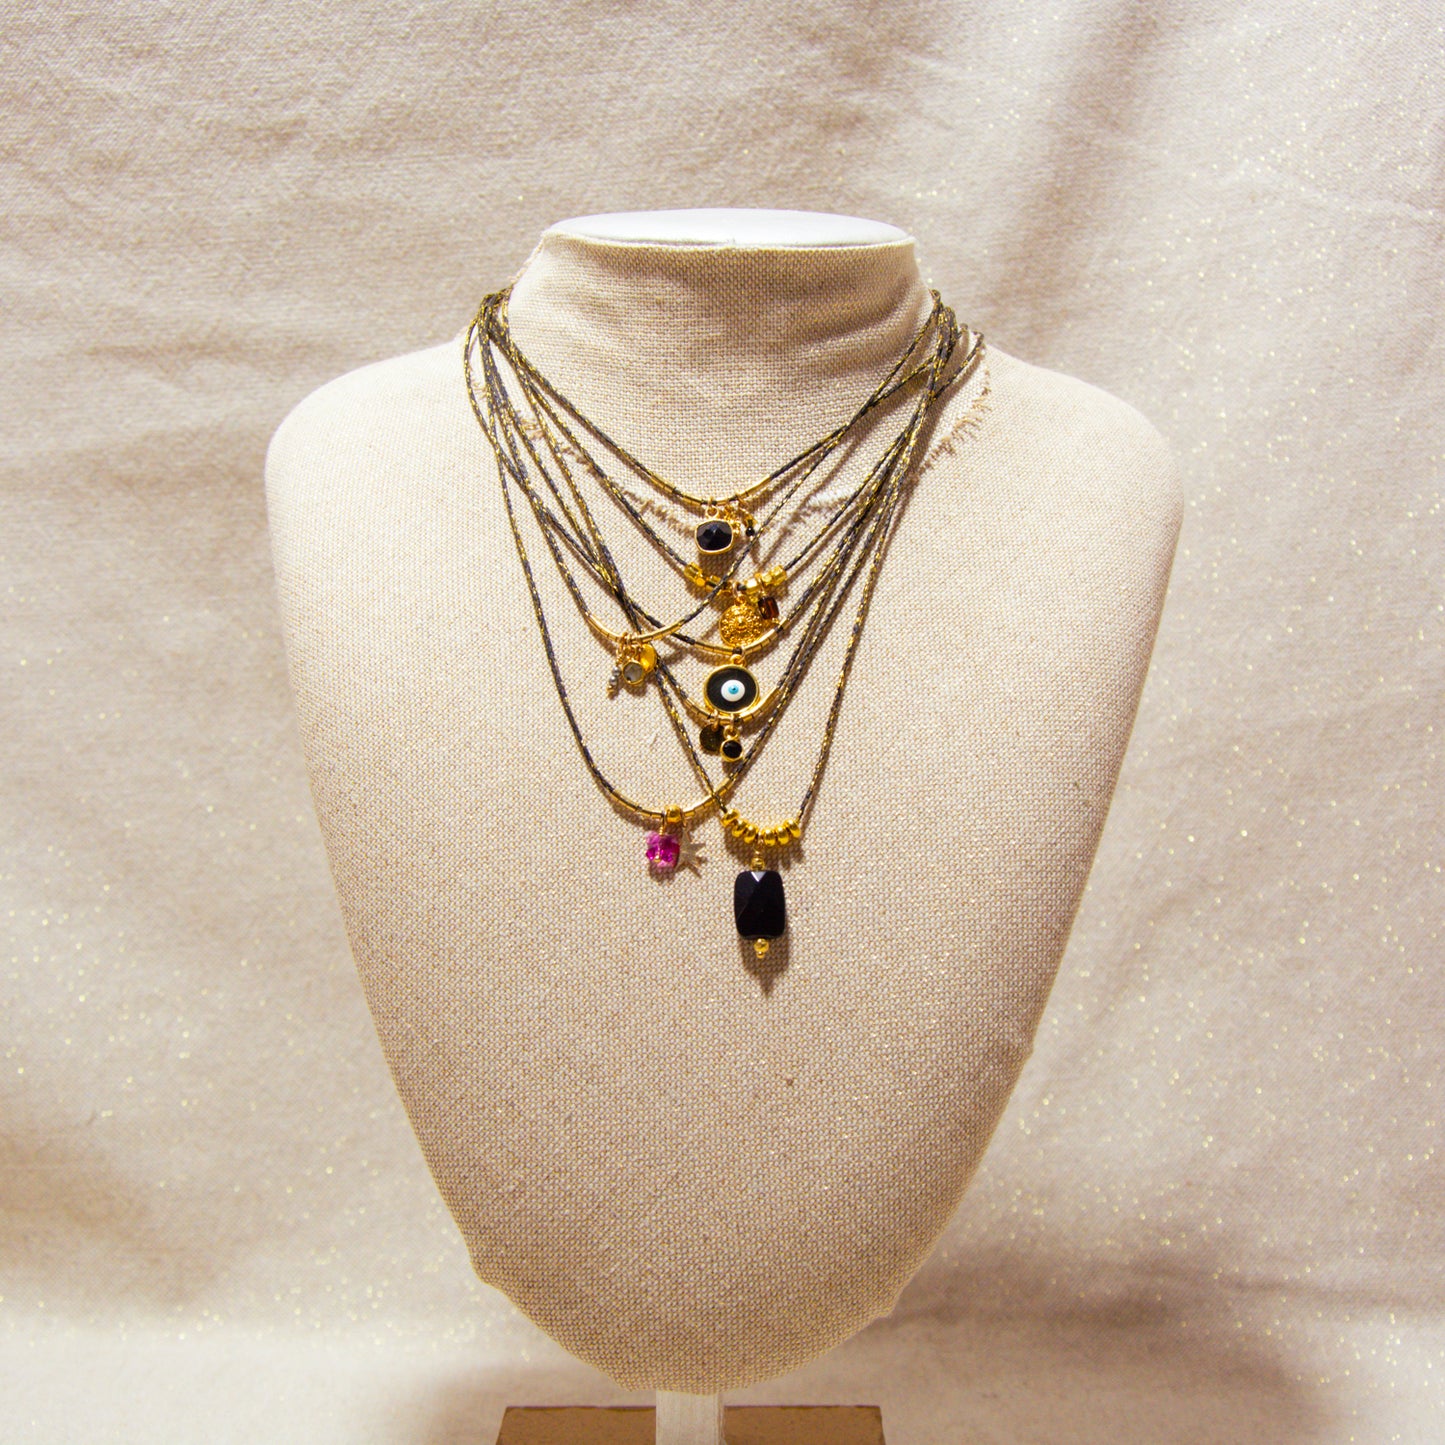 Necklace - Black and Gold Waxed Cotton - Black Onyx